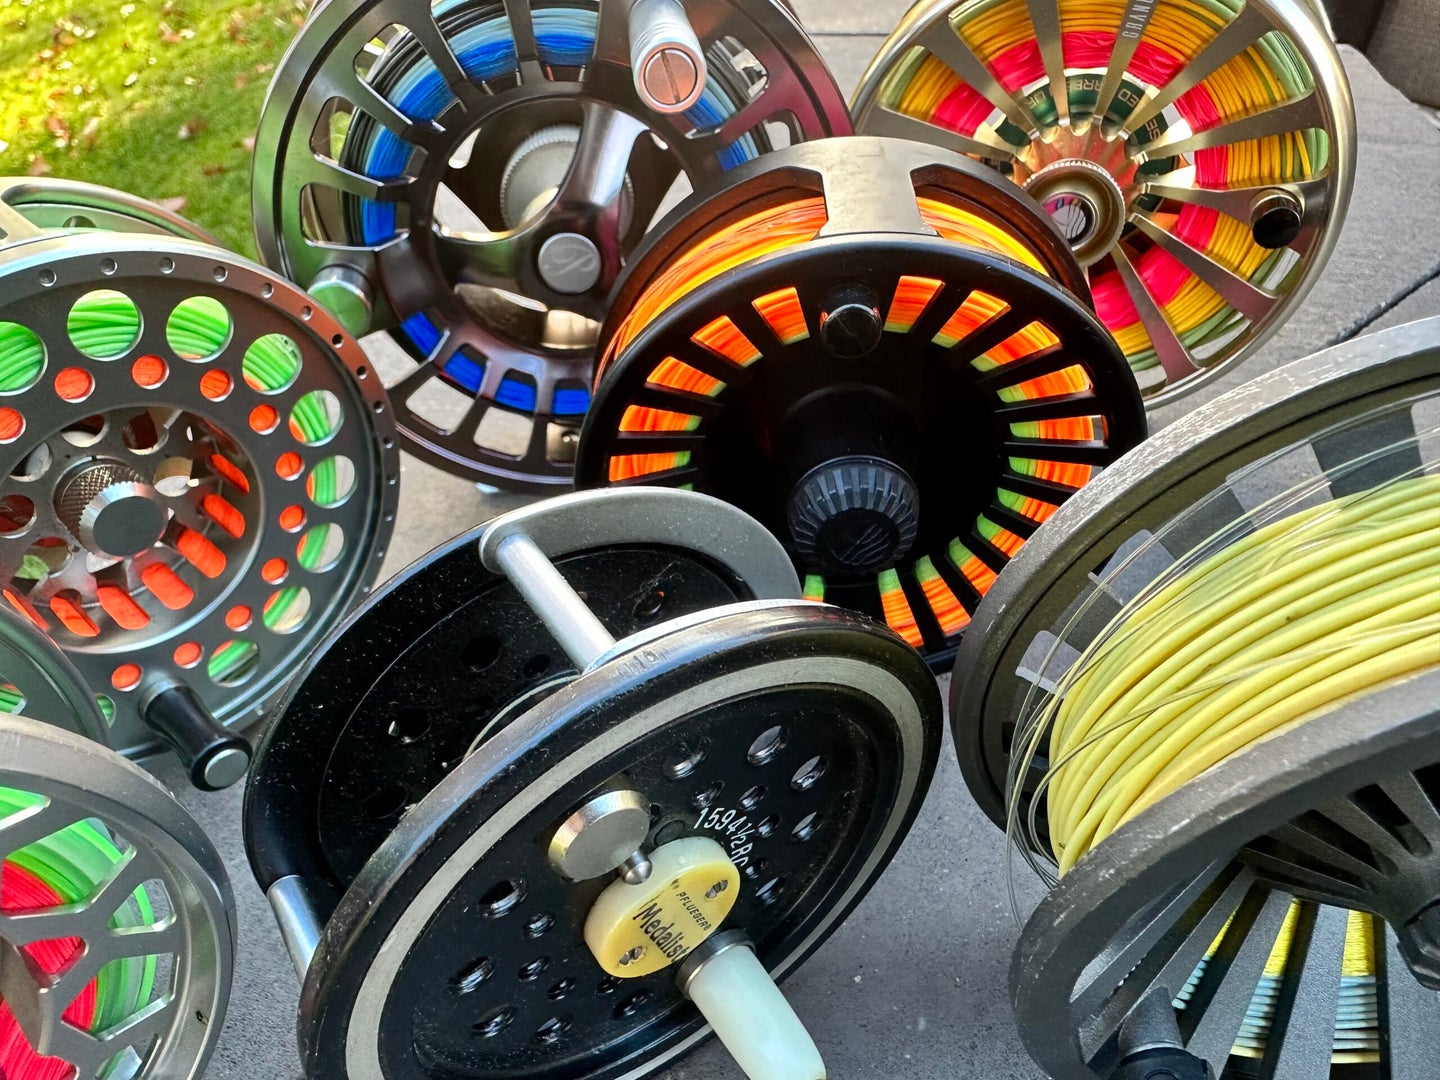 A collection of fly fishing reels arranged on a table.